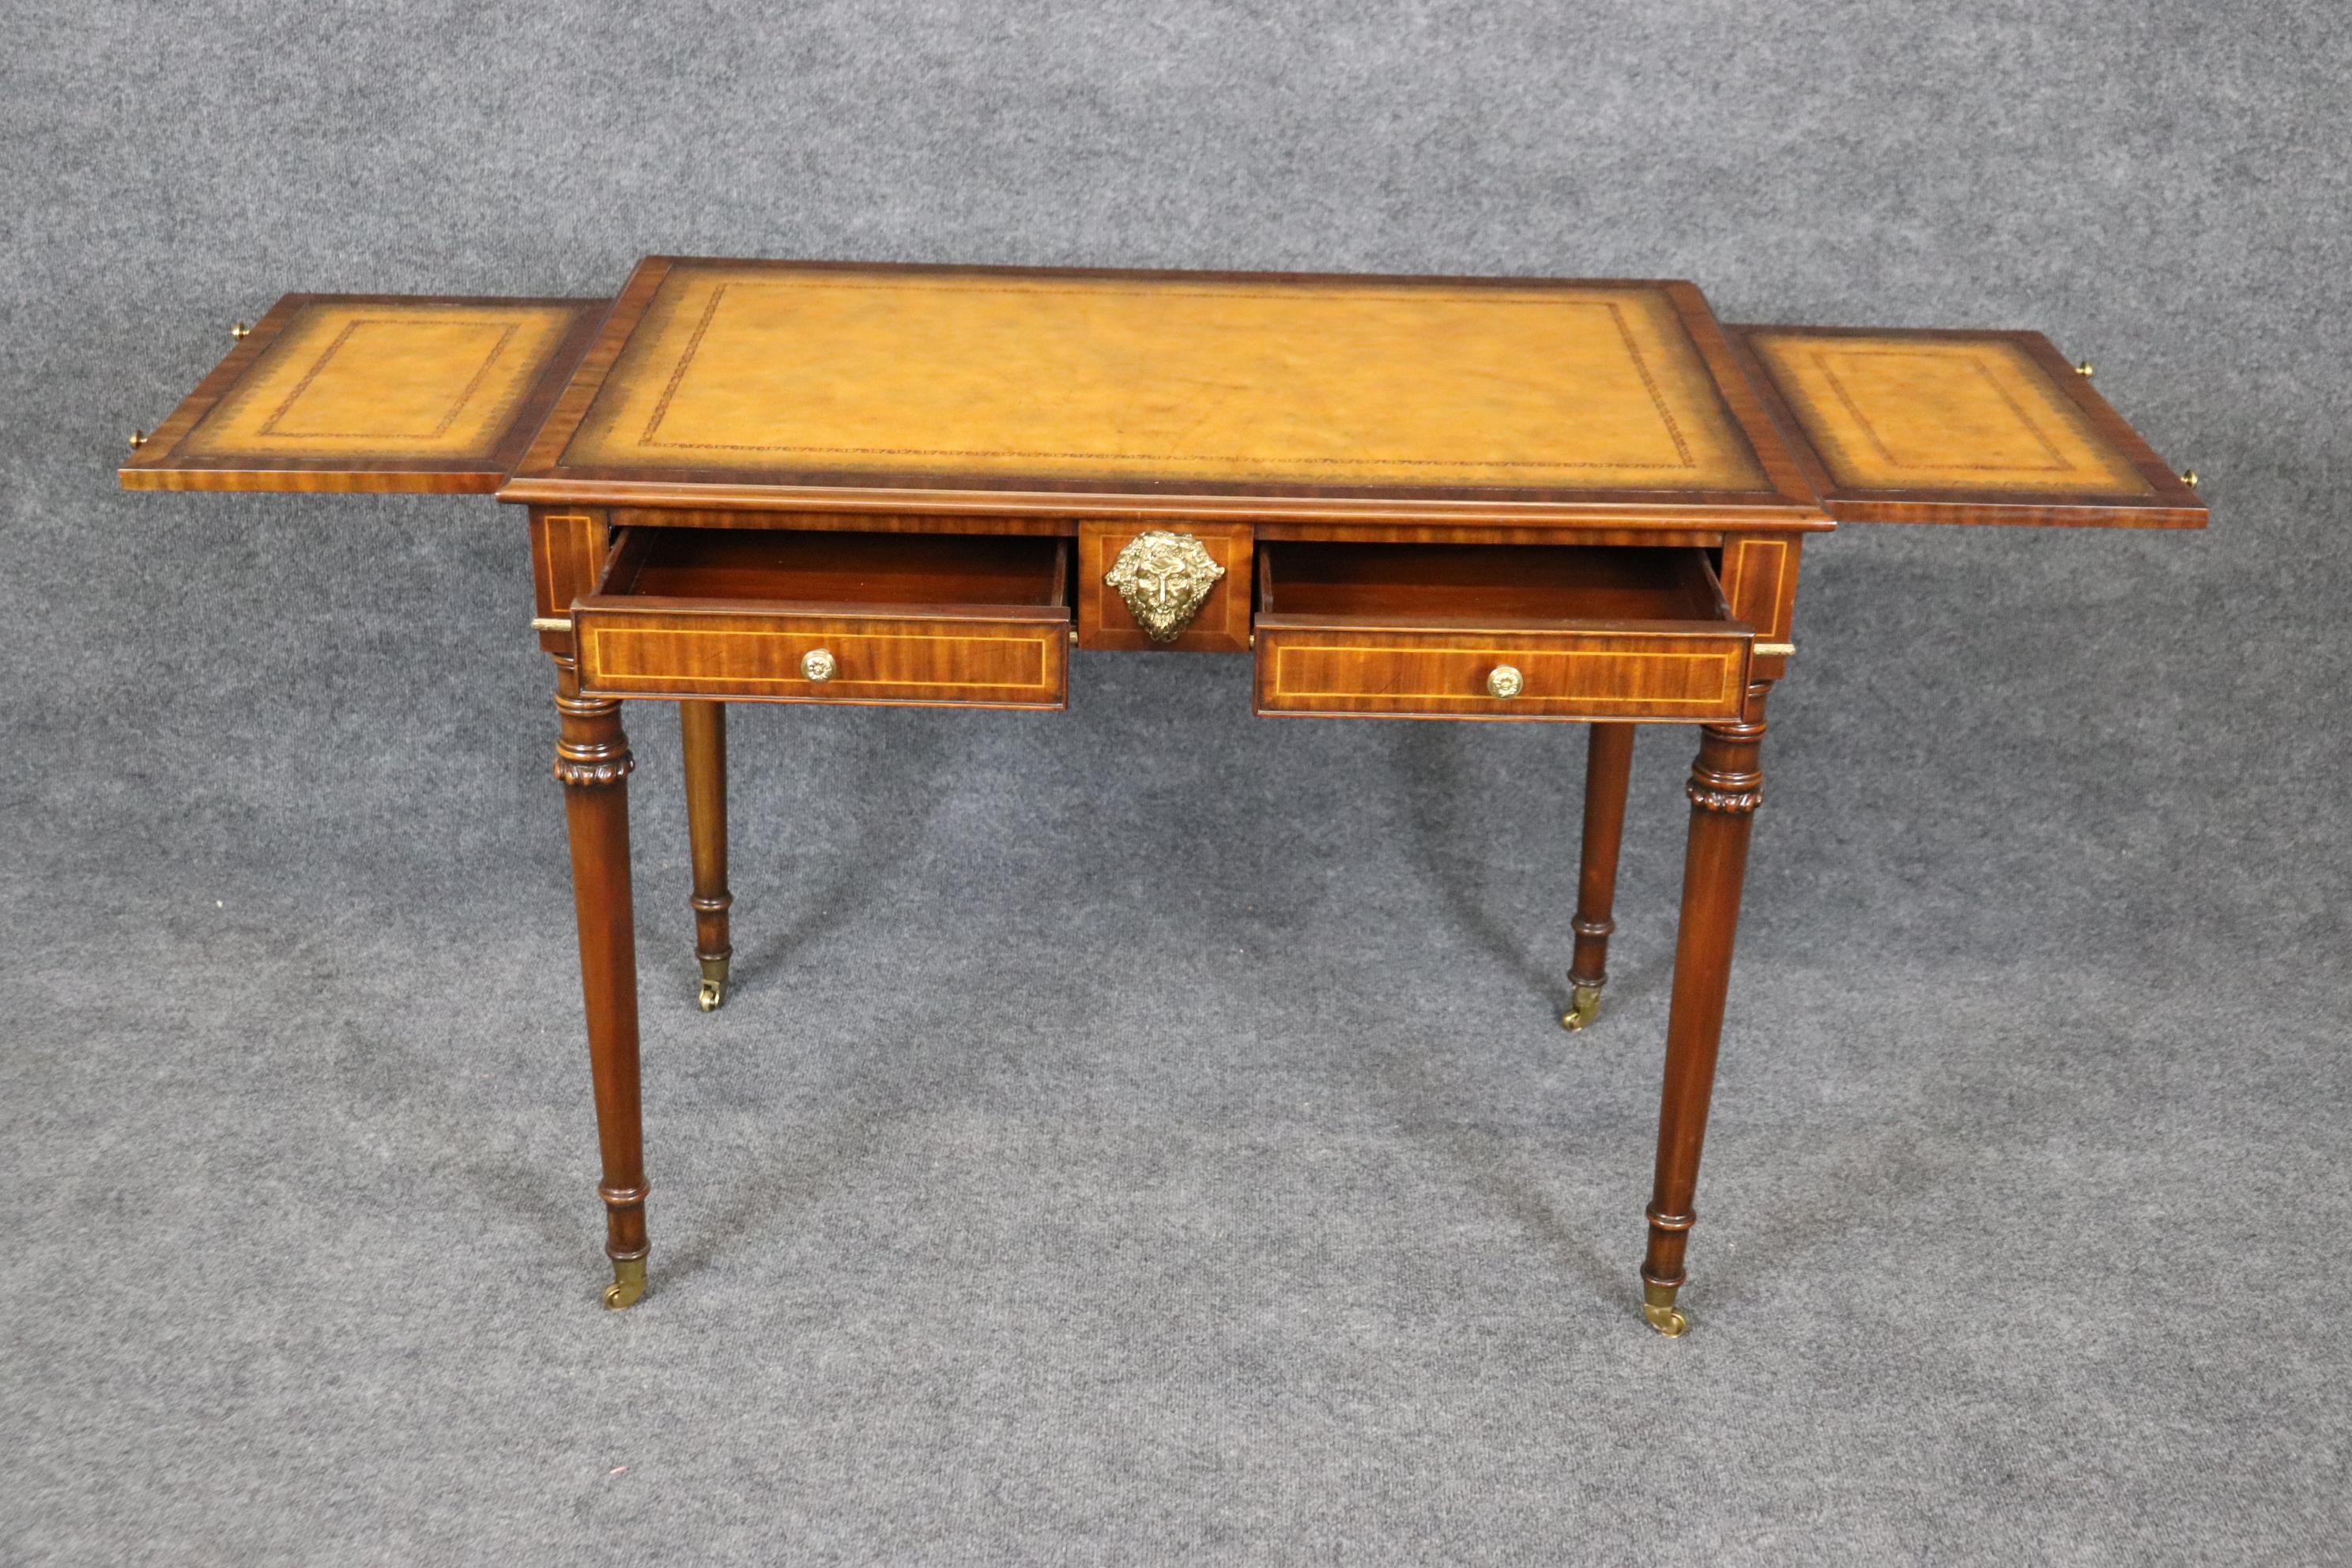 Yellow Ochre Leather Top Maitland Smith Regency Mahogany Desk with Trays For Sale 3